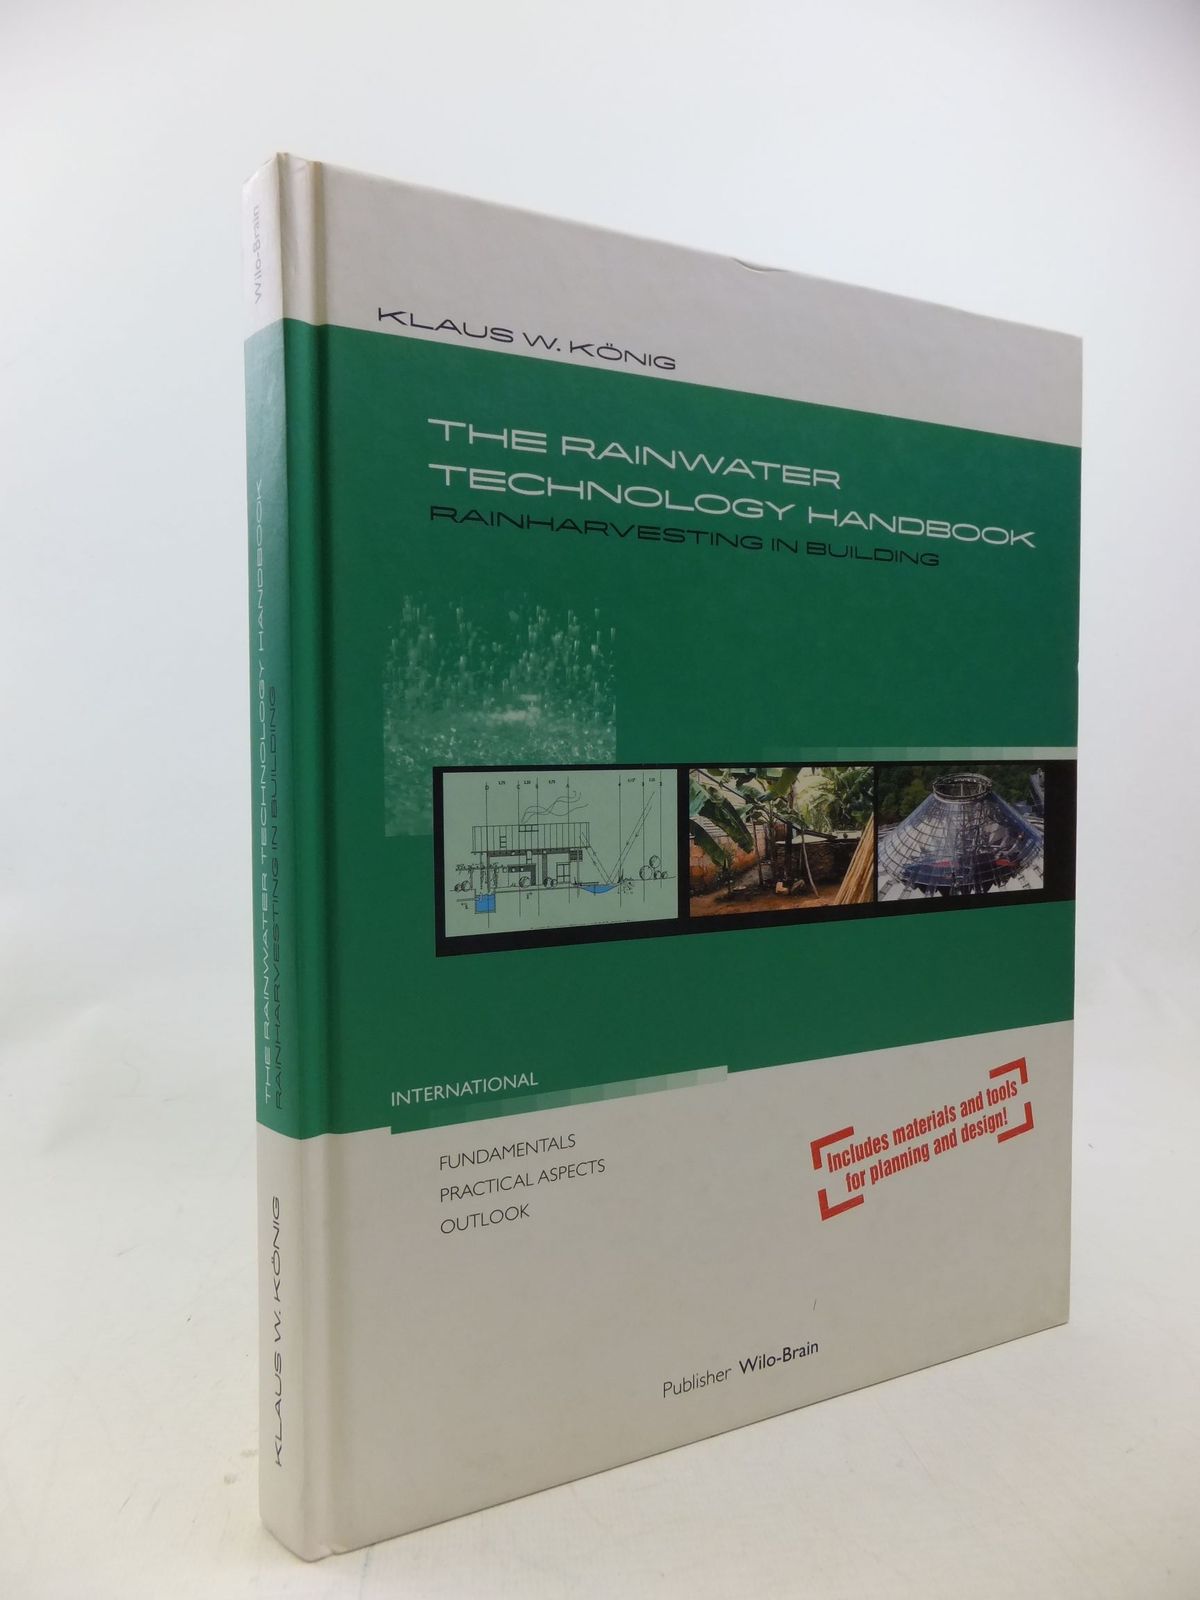 Photo of THE RAINWATER TECHNOLOGY HANDBOOK RAINHARVESTING IN BUILDING written by Konig, Klaus published by Wilo-Brain (STOCK CODE: 1710641)  for sale by Stella & Rose's Books